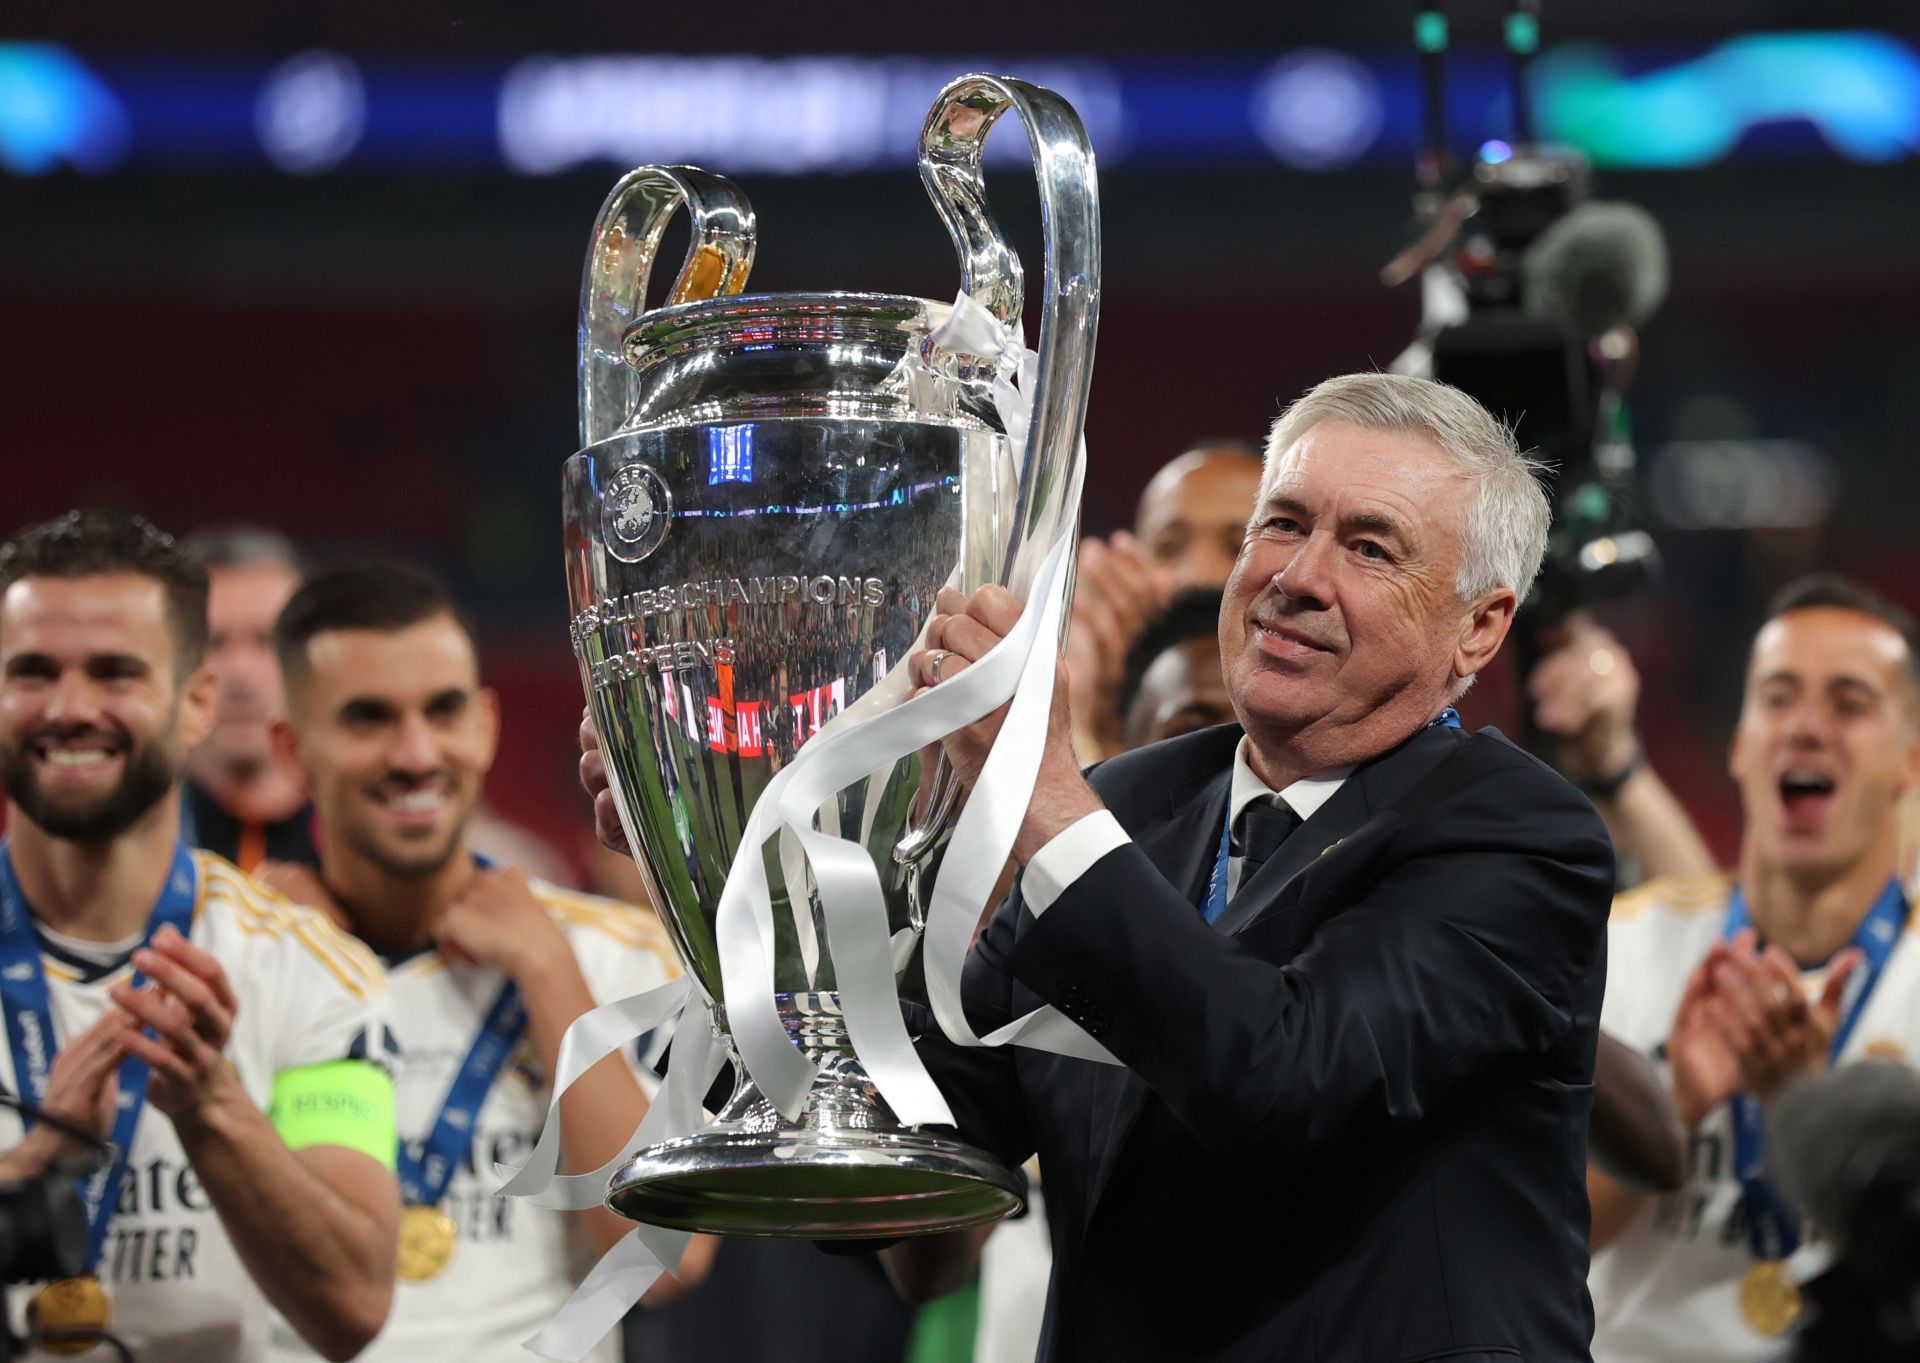 "It was difficult, more than expected" Real Madrid boss Carlo